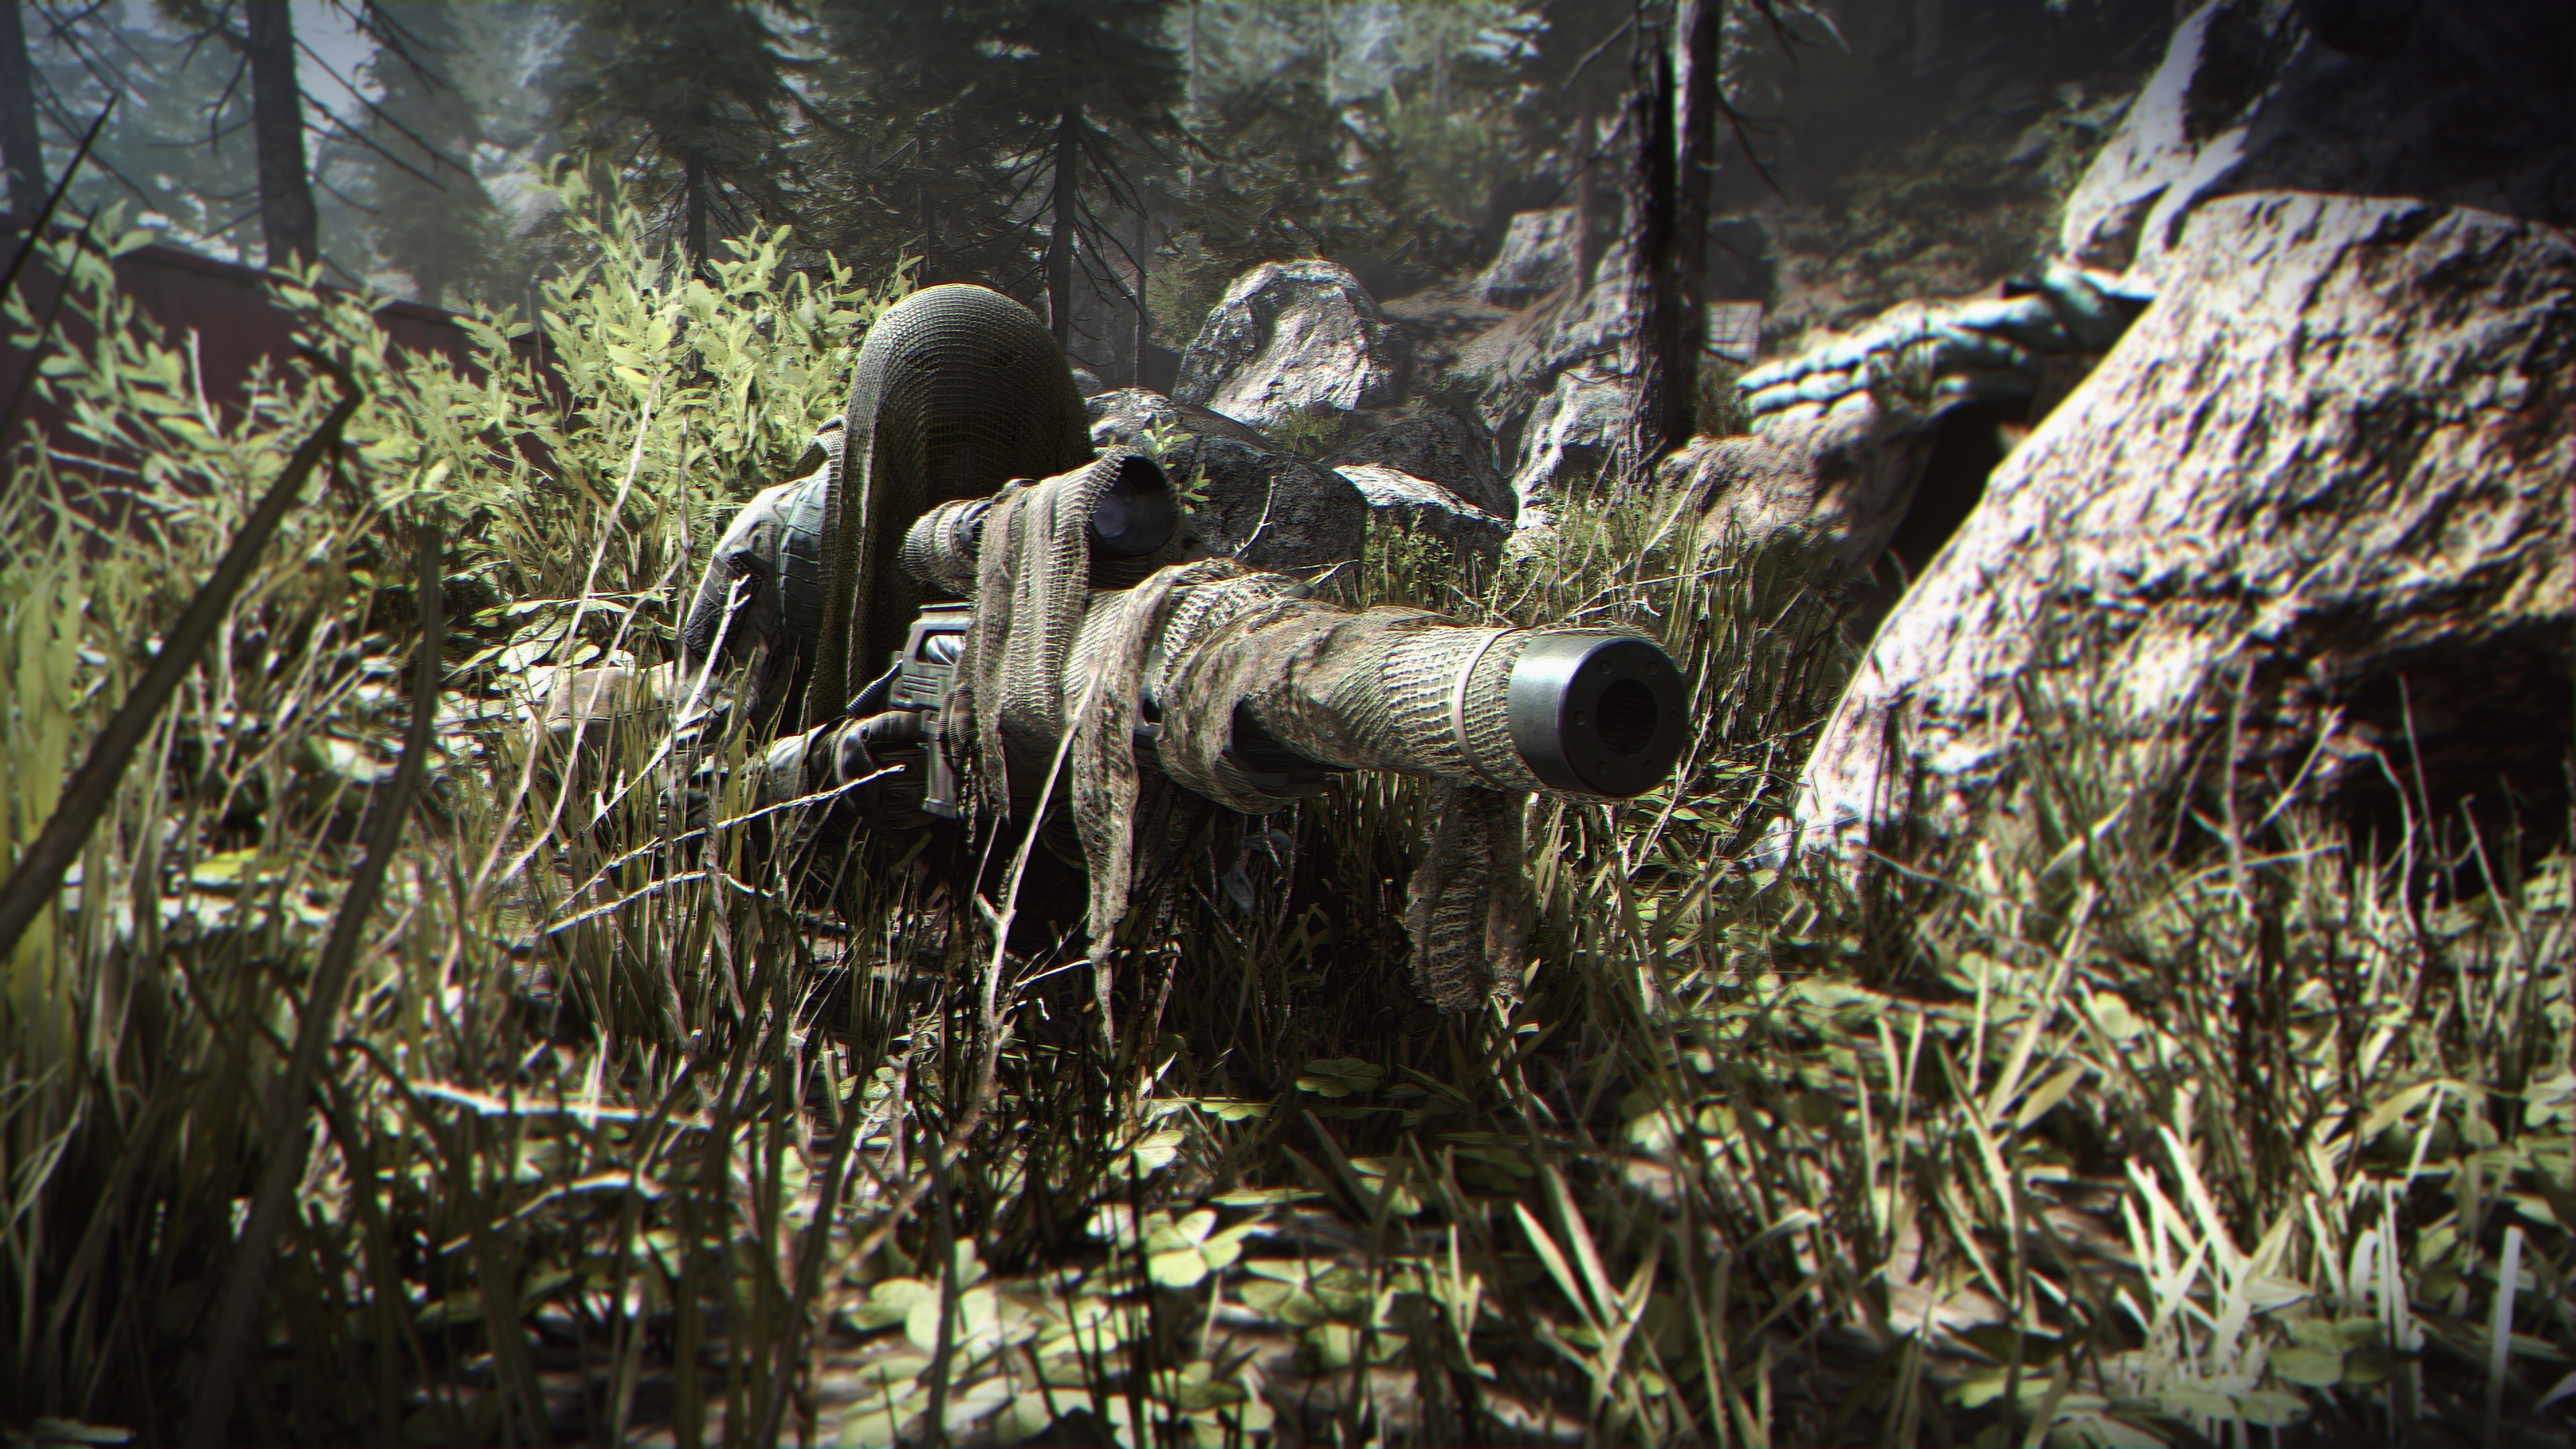 Ilya Maddyson rebukes new Call of Duty that depicts Russians as